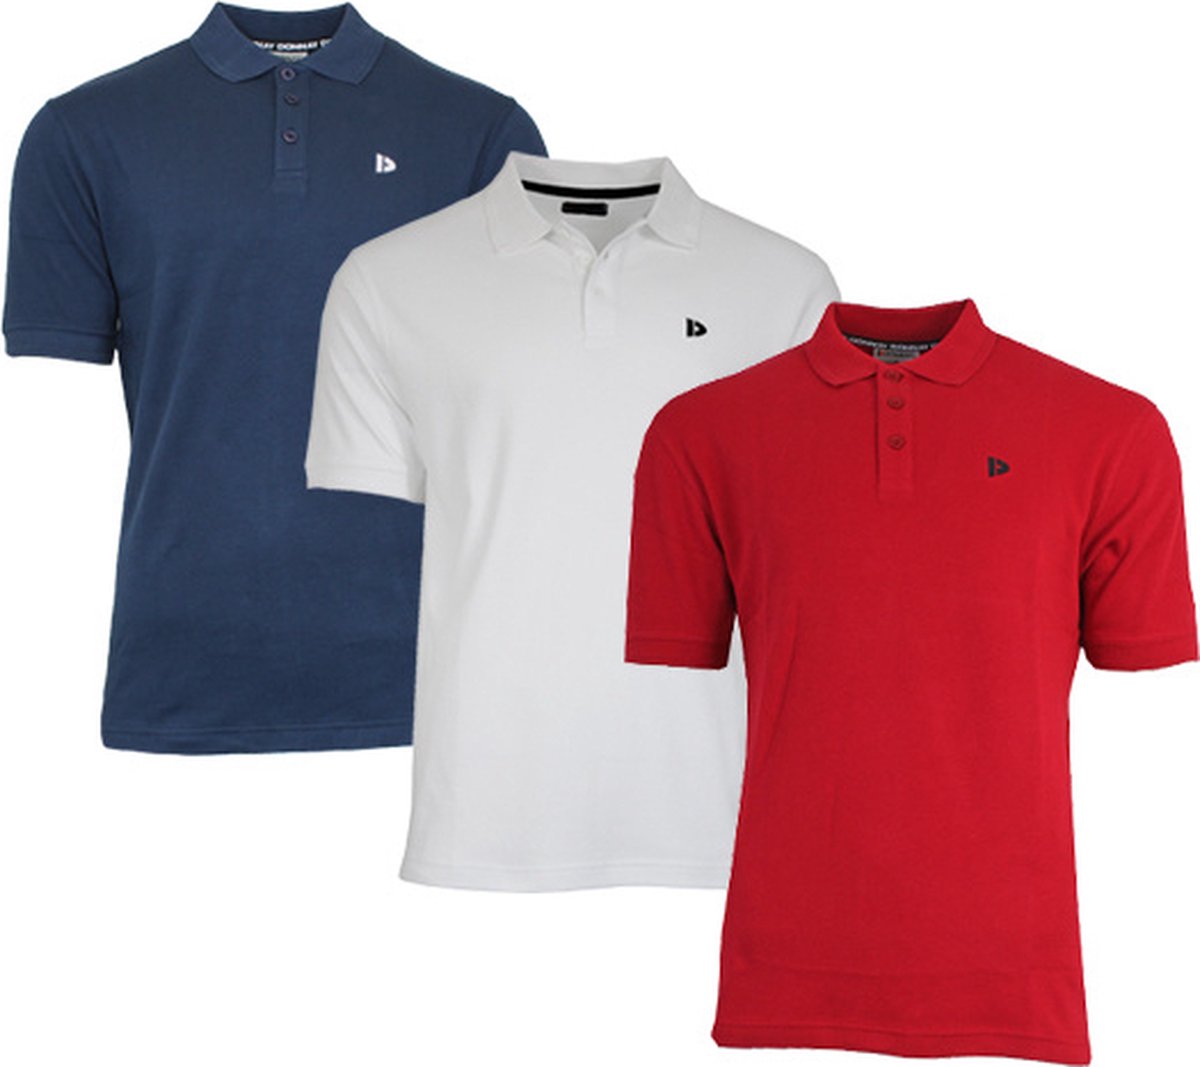 Donnay Polo 3-Pack - Sportpolo - Heren - Maat M - Navy/Wit/Berry (419)